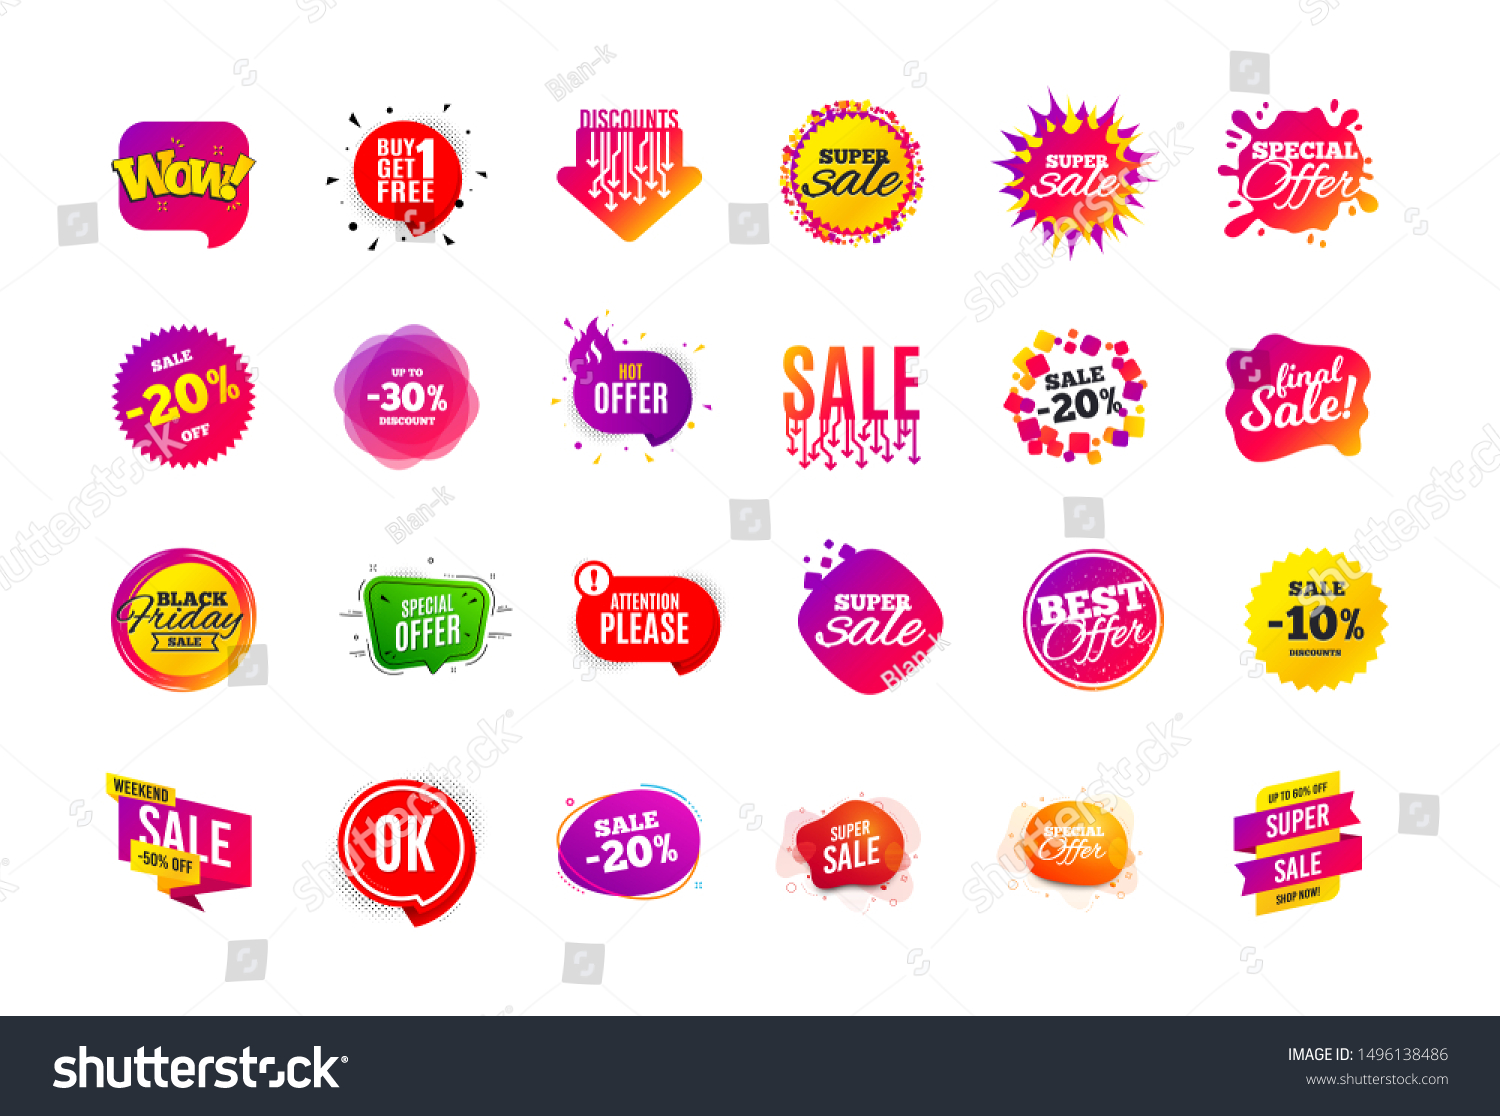 Sale banner badge. Special offer discount tags. Coupon shape templates design. Cyber monday sale discounts. Black friday shopping icons. Best ultimate offer badge. Super discount icons. Vector banners #1496138486